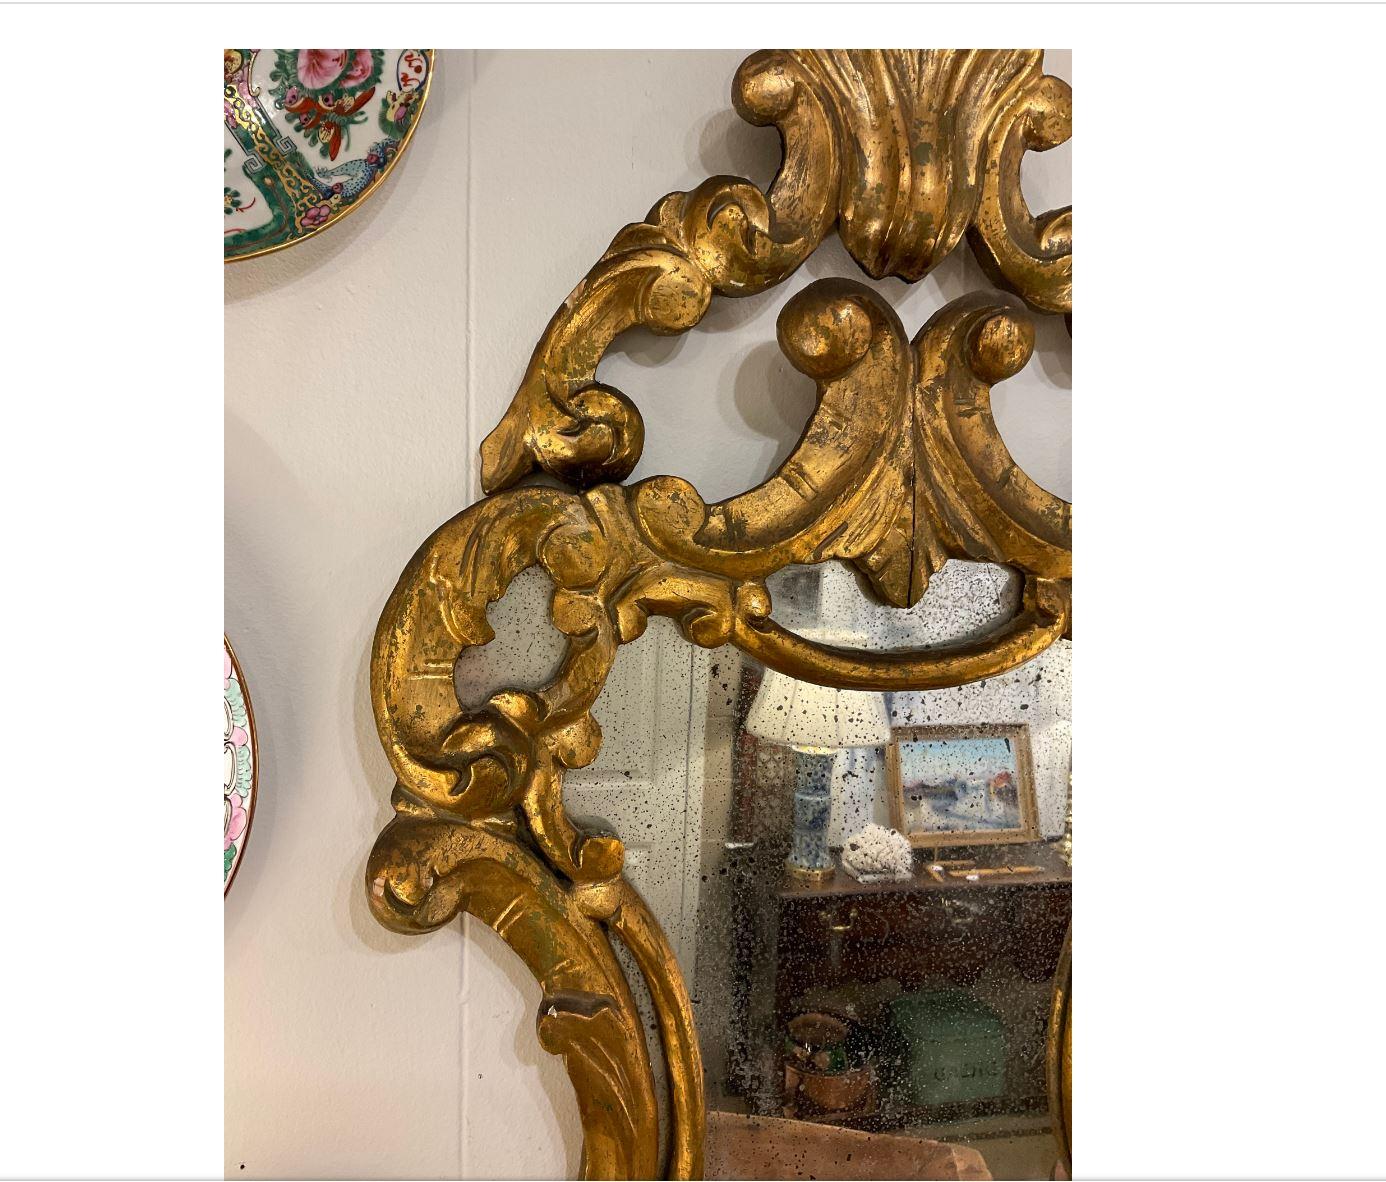 This 19th century Italian guilt mirror is so beautiful in person. The details of the mirror are perfect for any room that needs a little extra life.